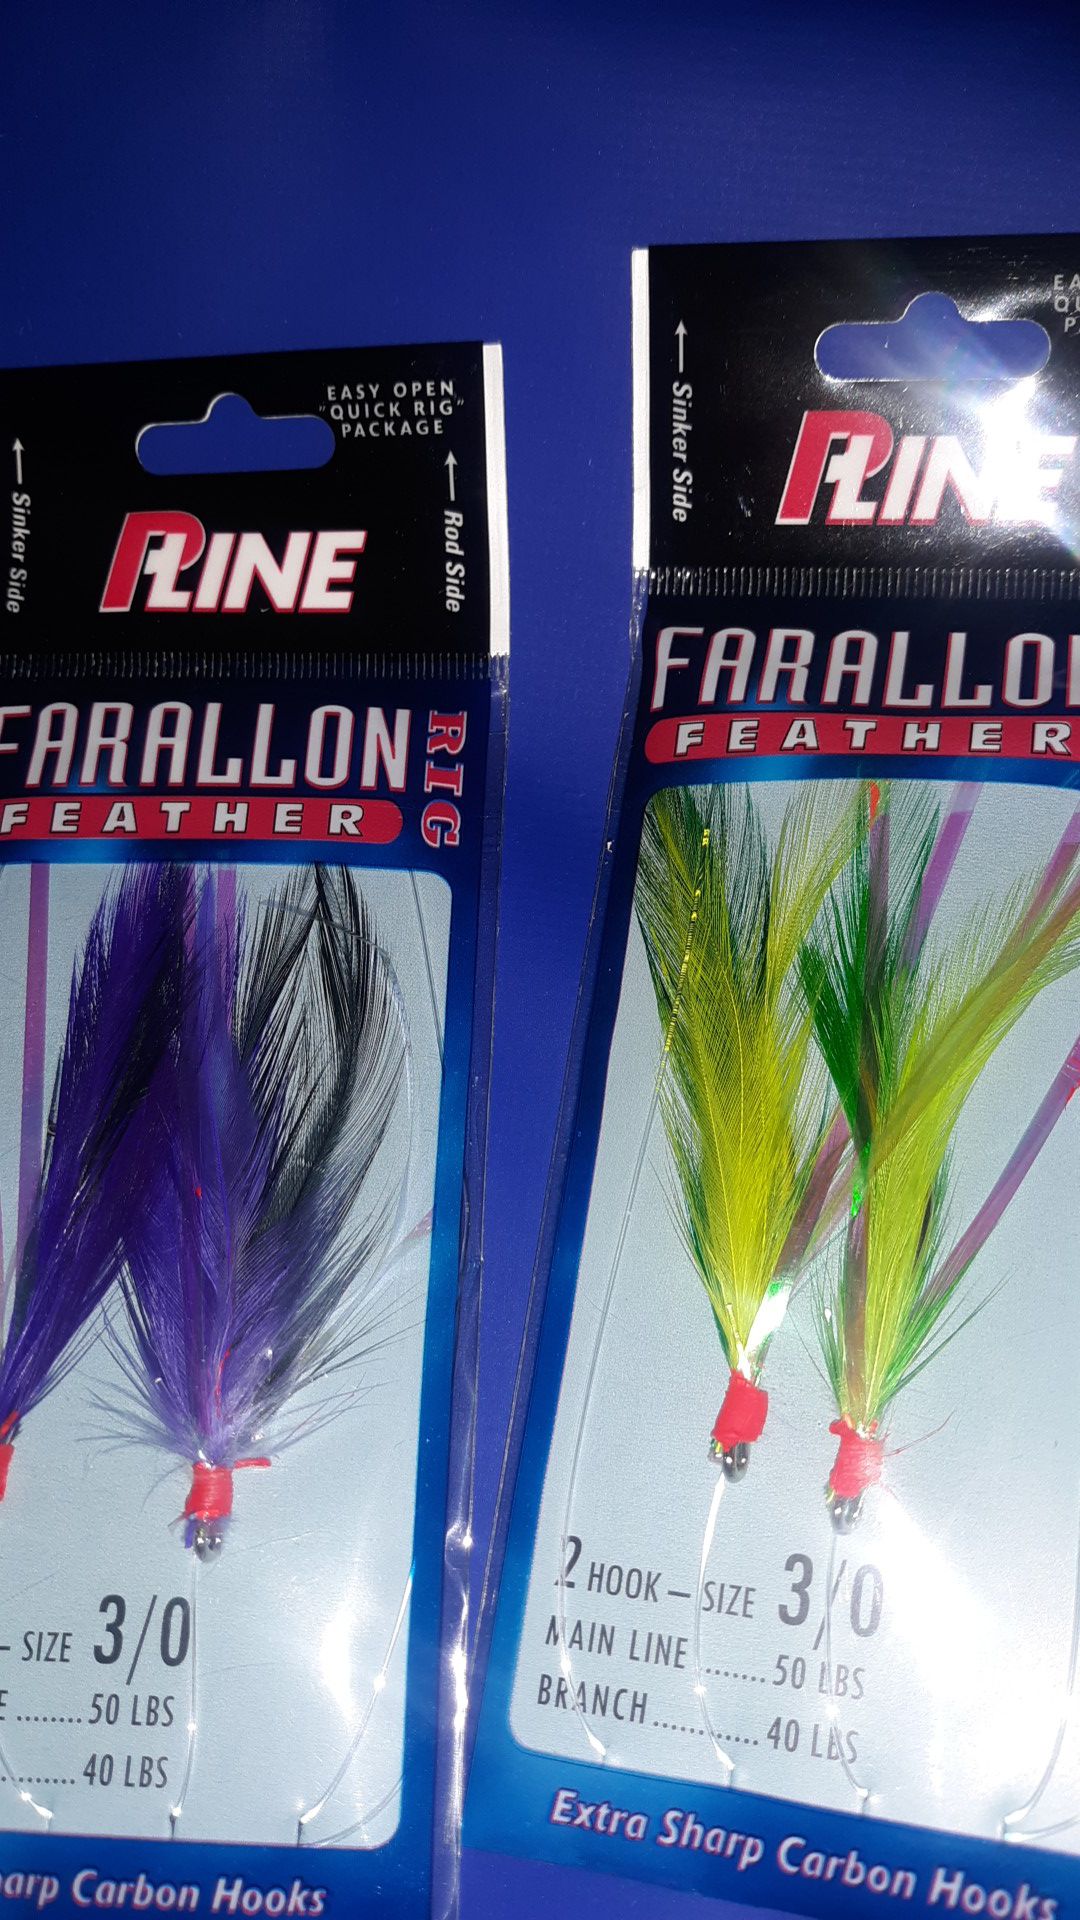 PLine feathers for fishing 2 hook size 3/0